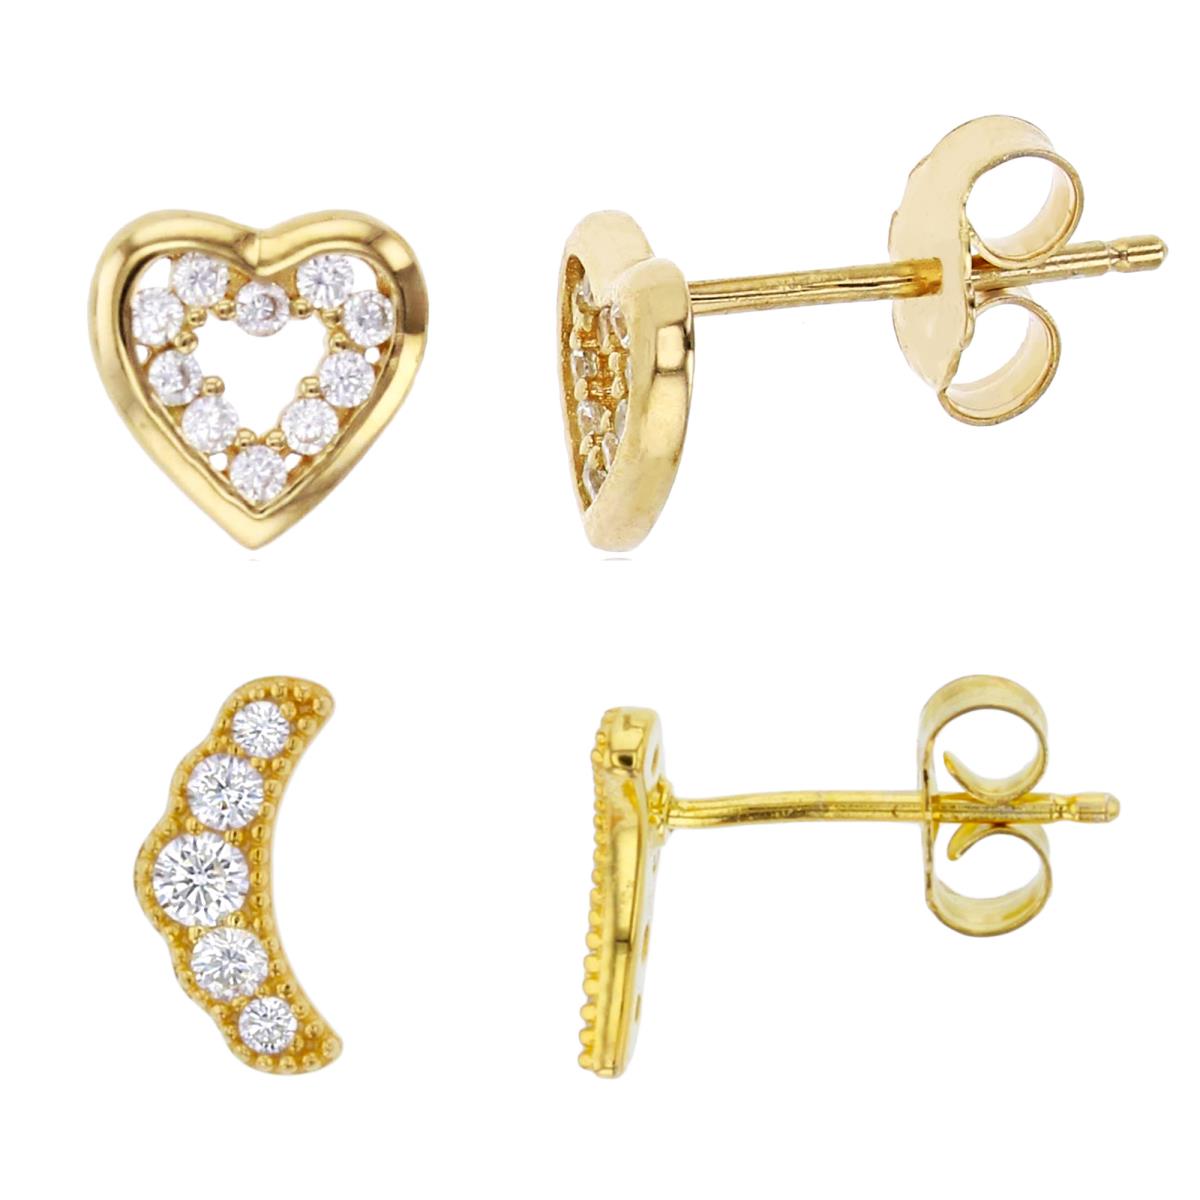 Sterling Silver Yellow Rnd White CZ Croissant & Heart Stud Earrings Set